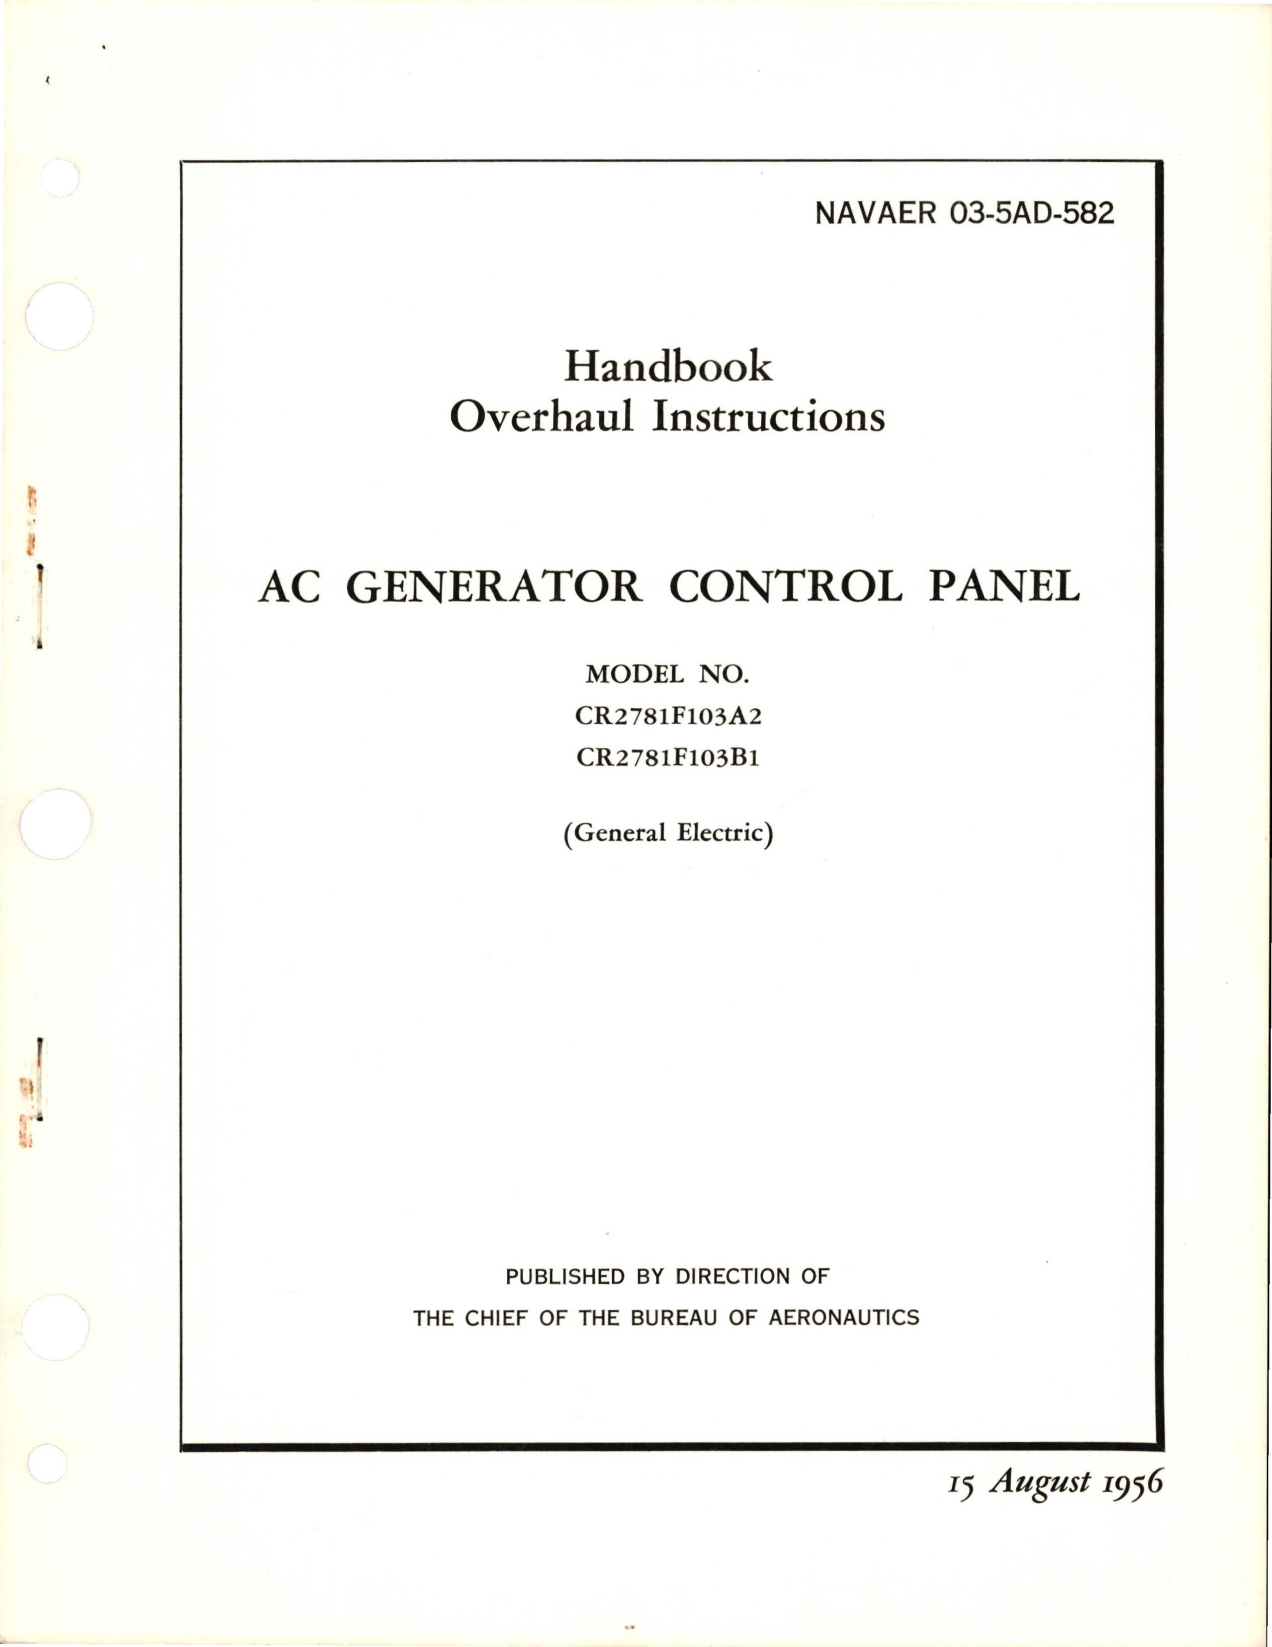 Sample page 1 from AirCorps Library document: Overhaul Instructions for AC Generator Control Panel - Models CR2781F103A2 and CR2781F103B1 